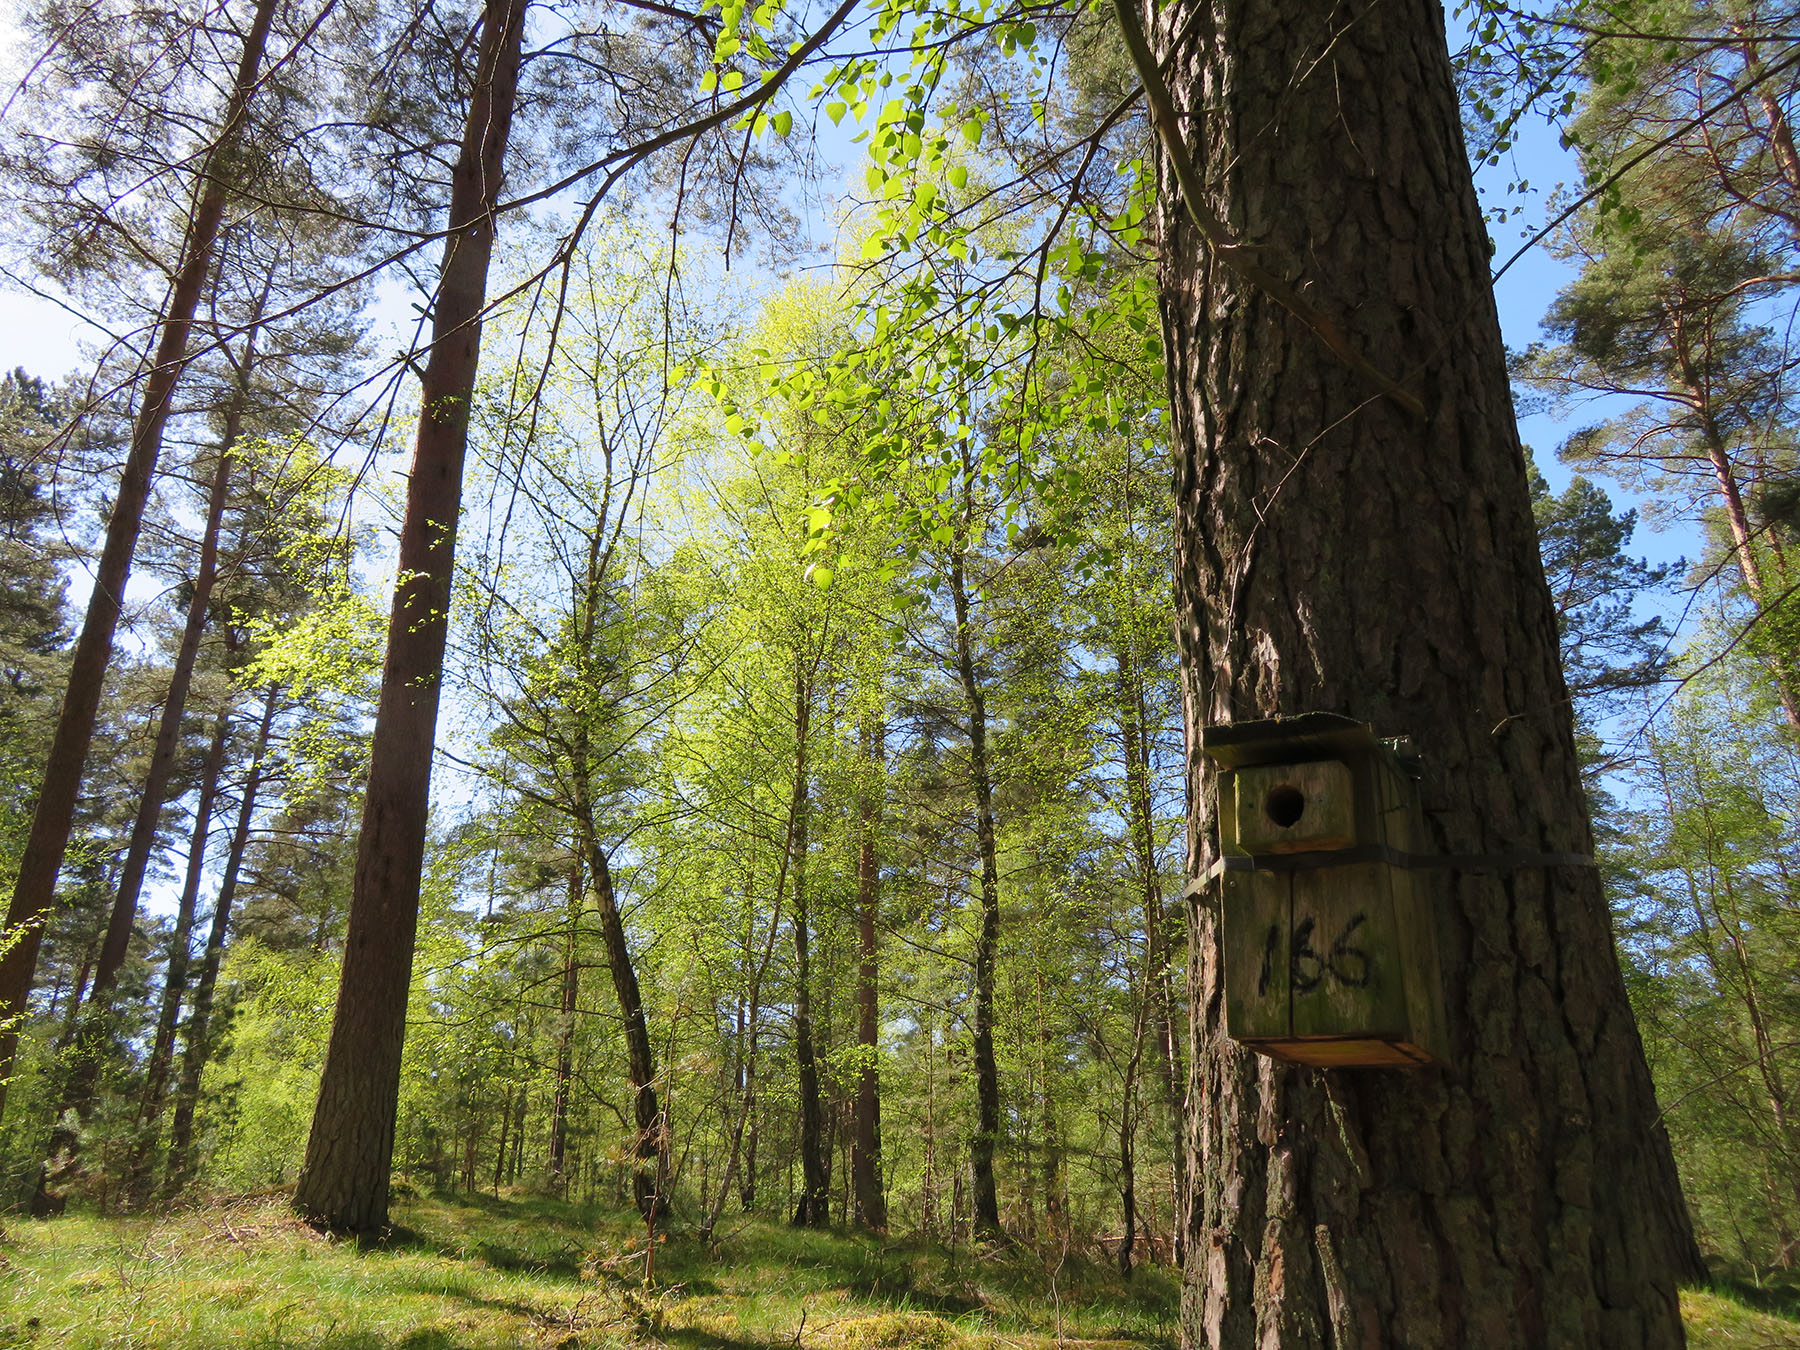 Nest boxes provide breeding grounds for pied flycatchers in the Swedish forest. Photo credit: Koosje Lamers